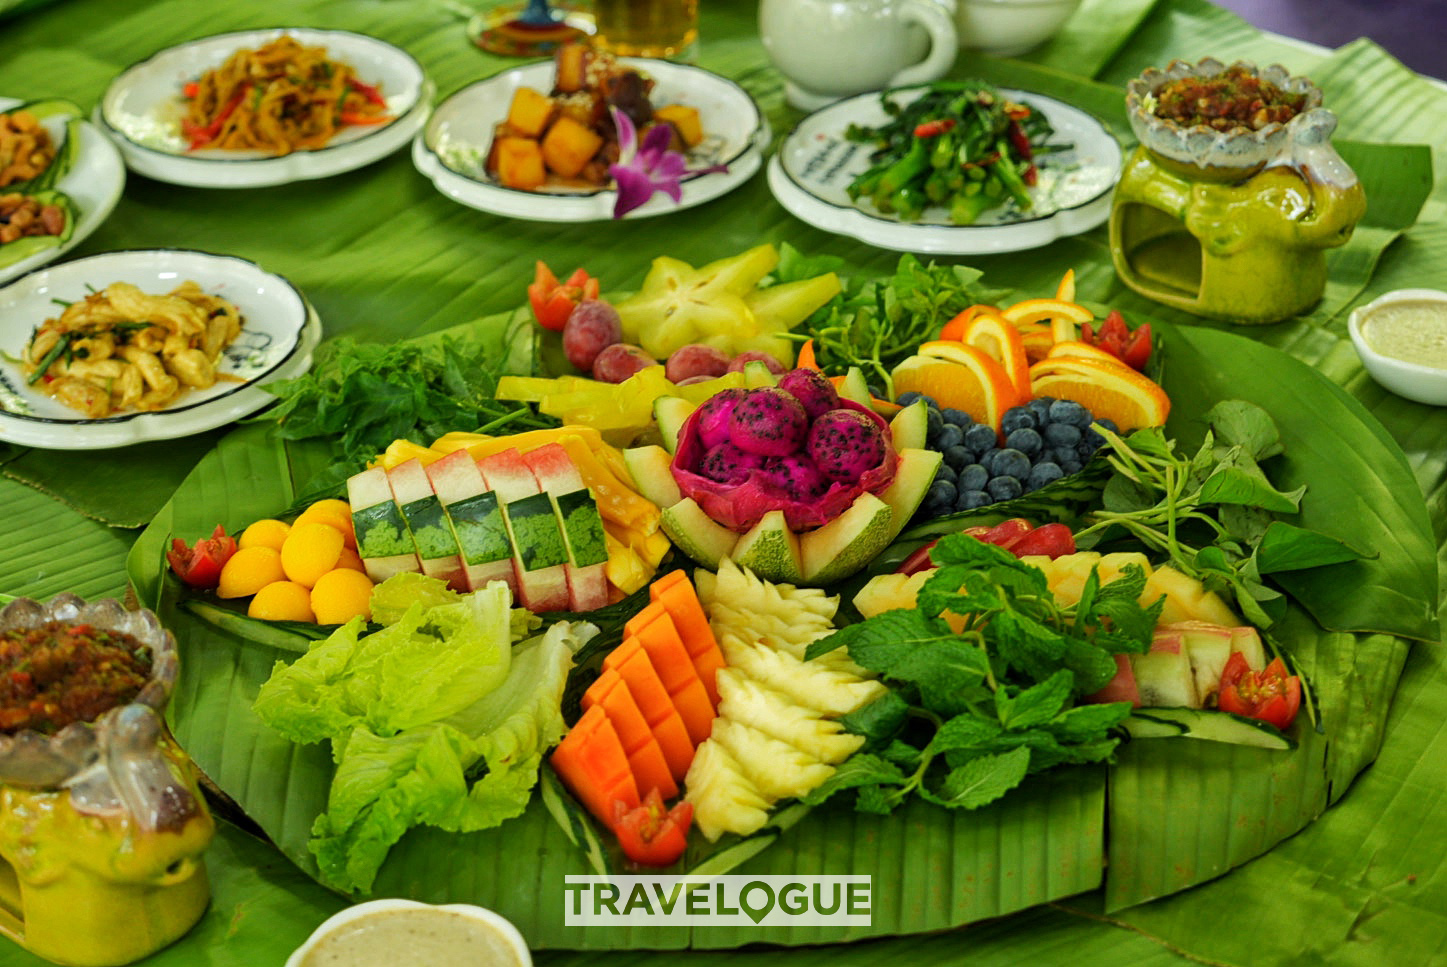 A vegetarian meal in Xishuangbanna, southwest China's Yunnan Province. /CGTN